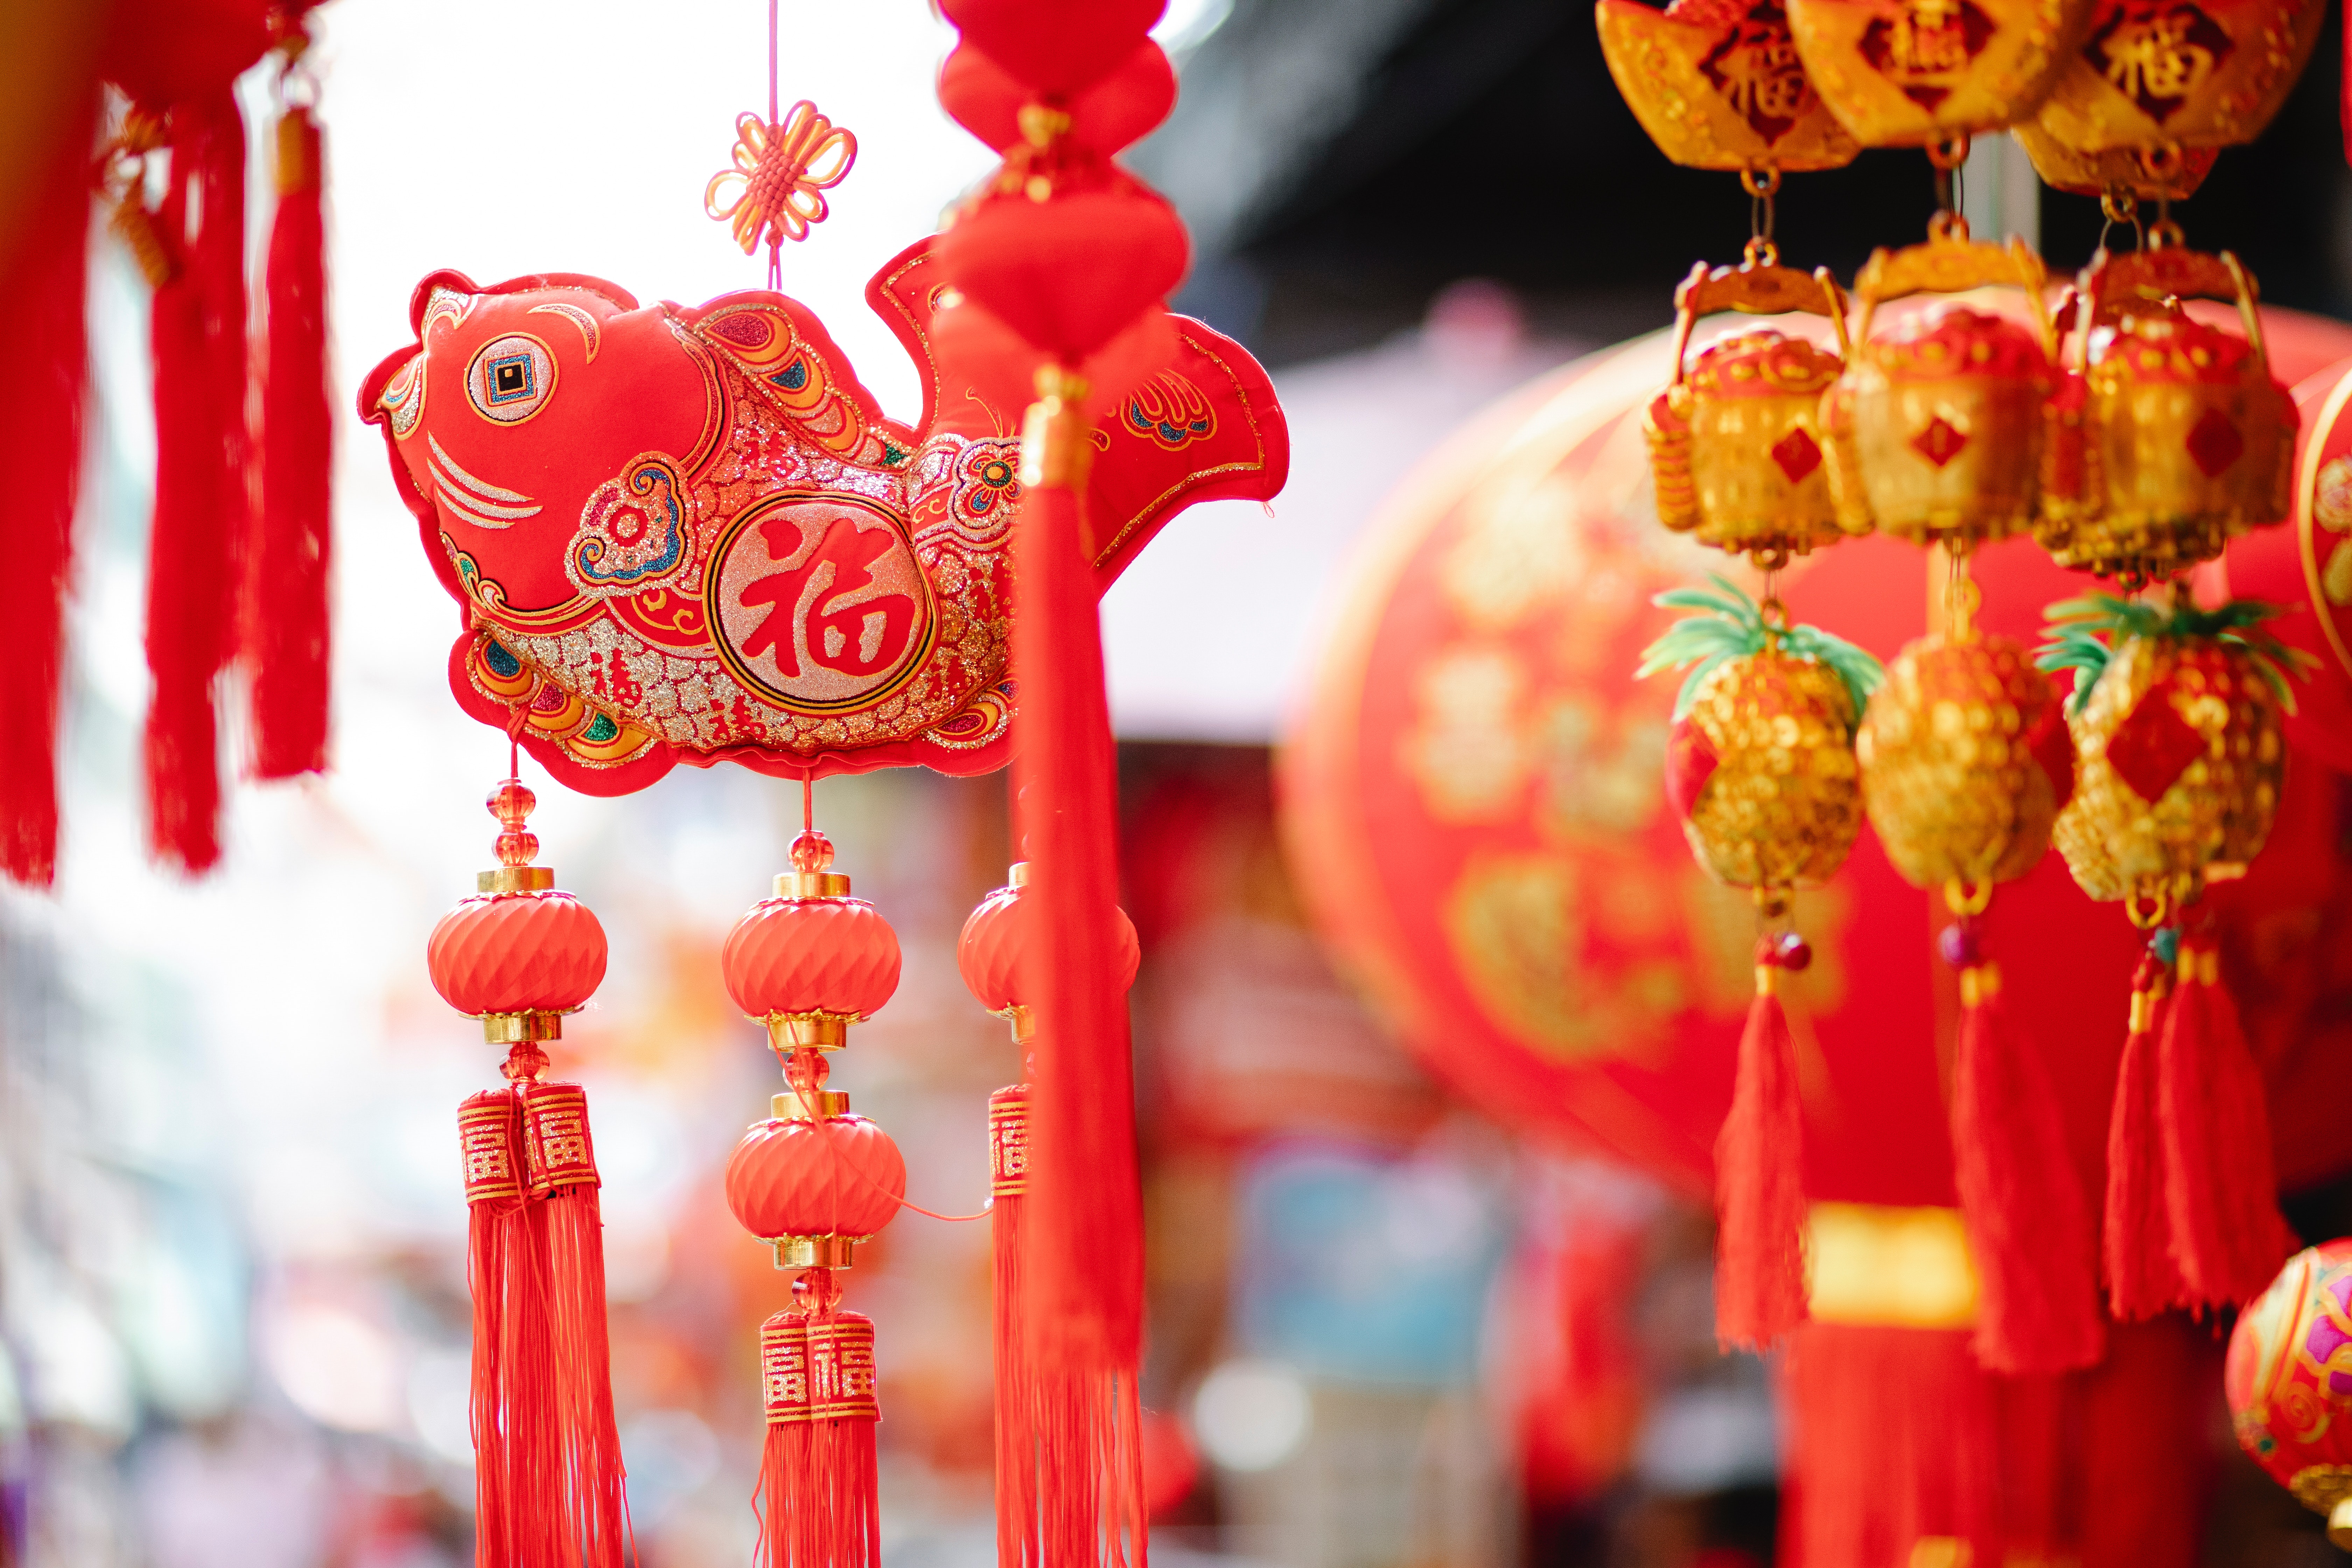 Mandarin vs. Cantonese: What's the difference? An easy guide